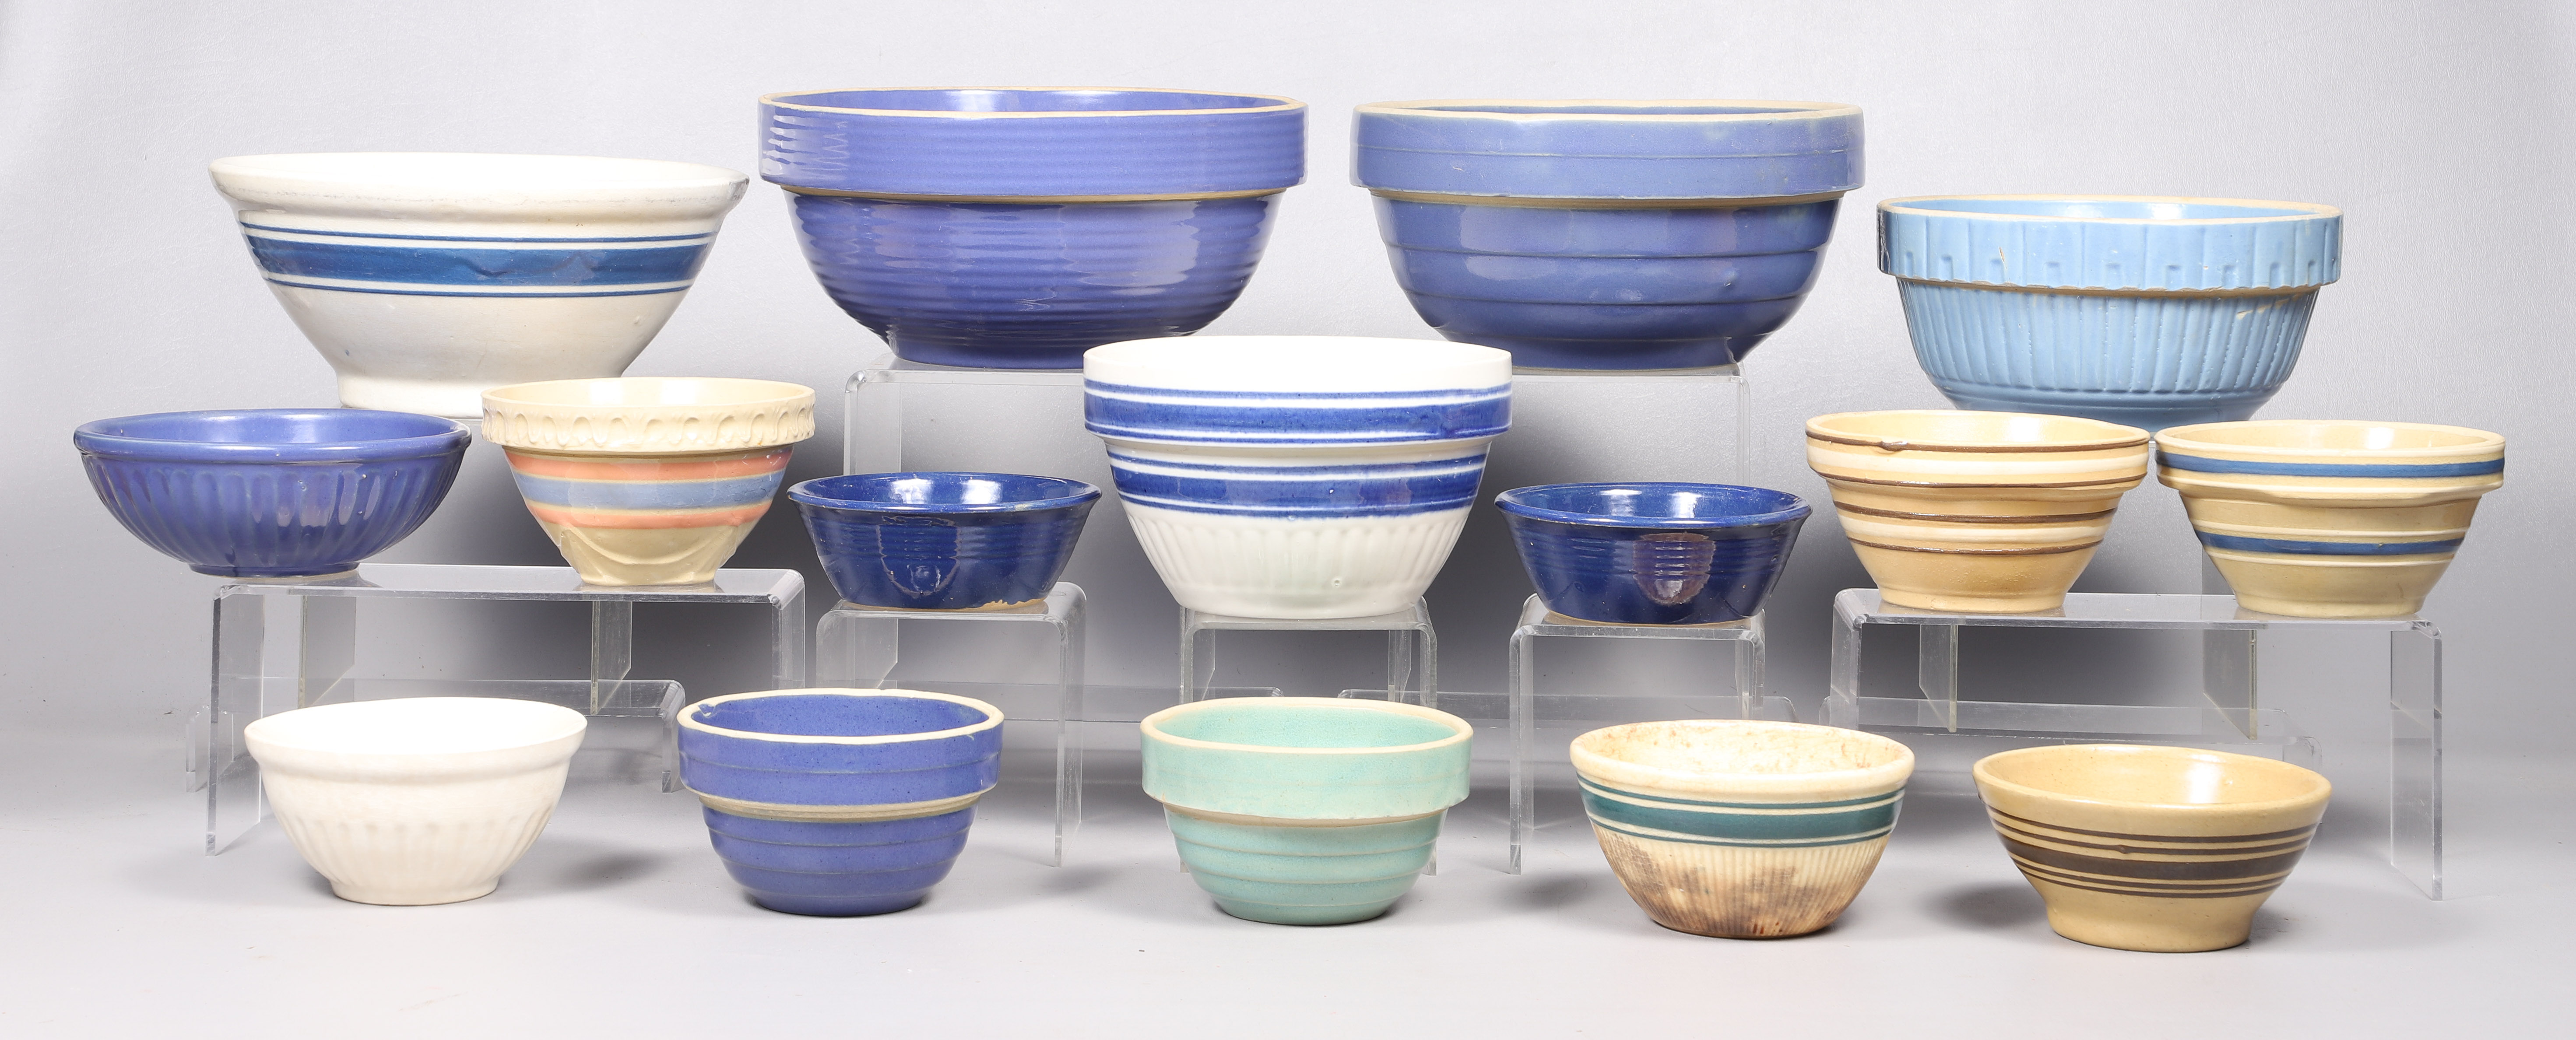 (16) Stoneware and pottery bowls,